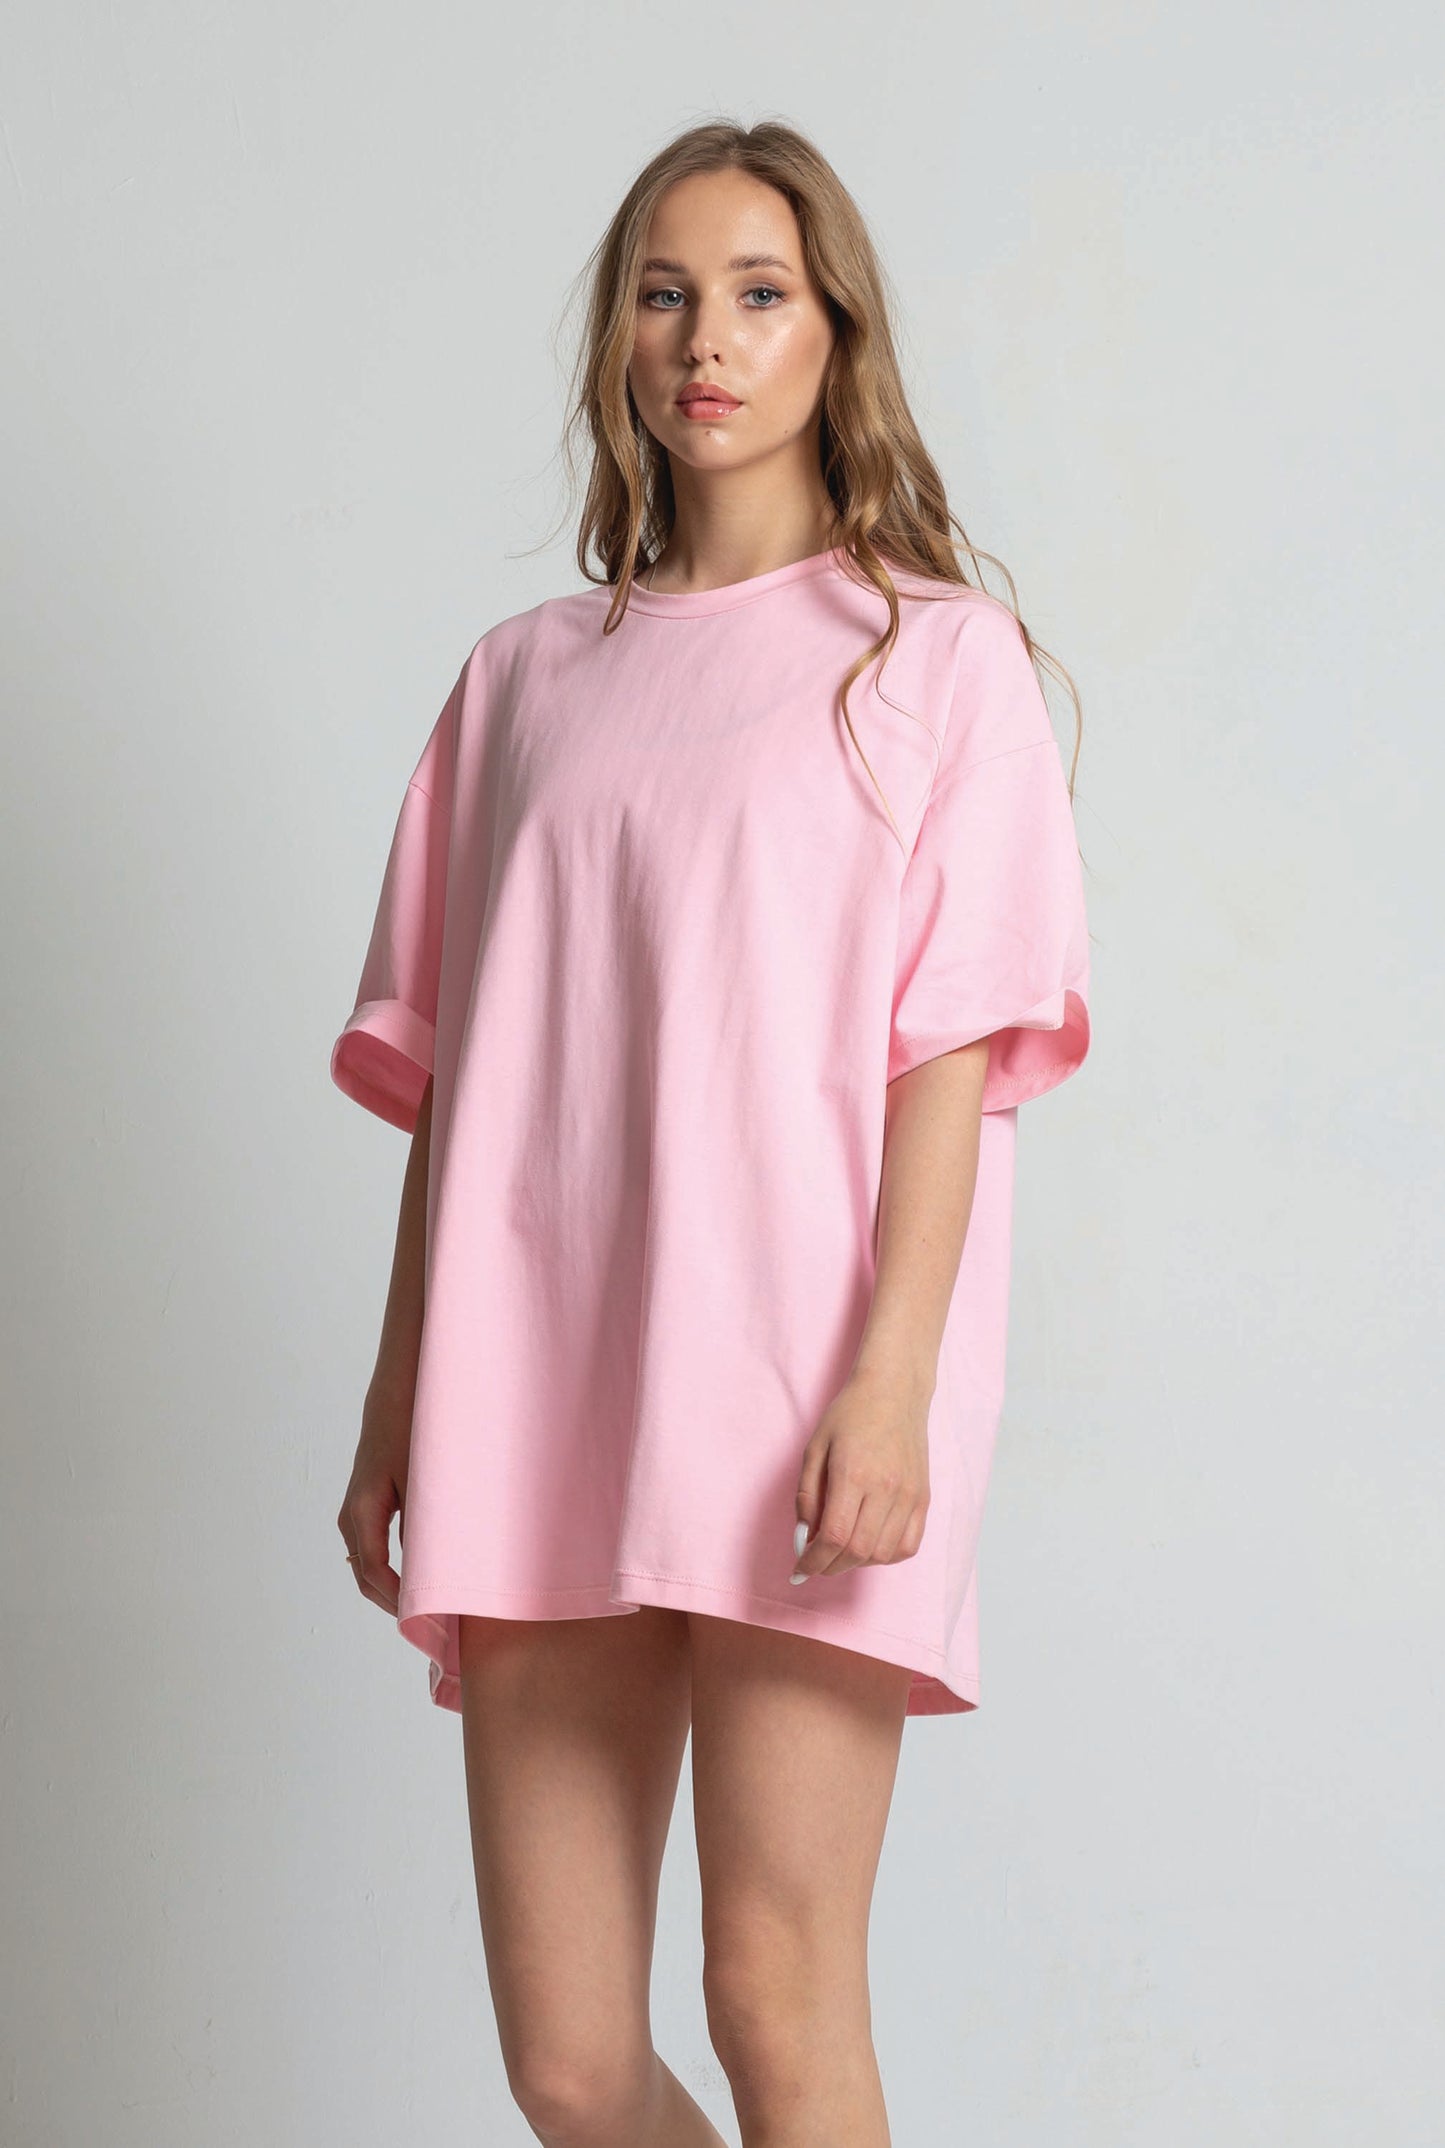 baby pink oversized tshirt for women